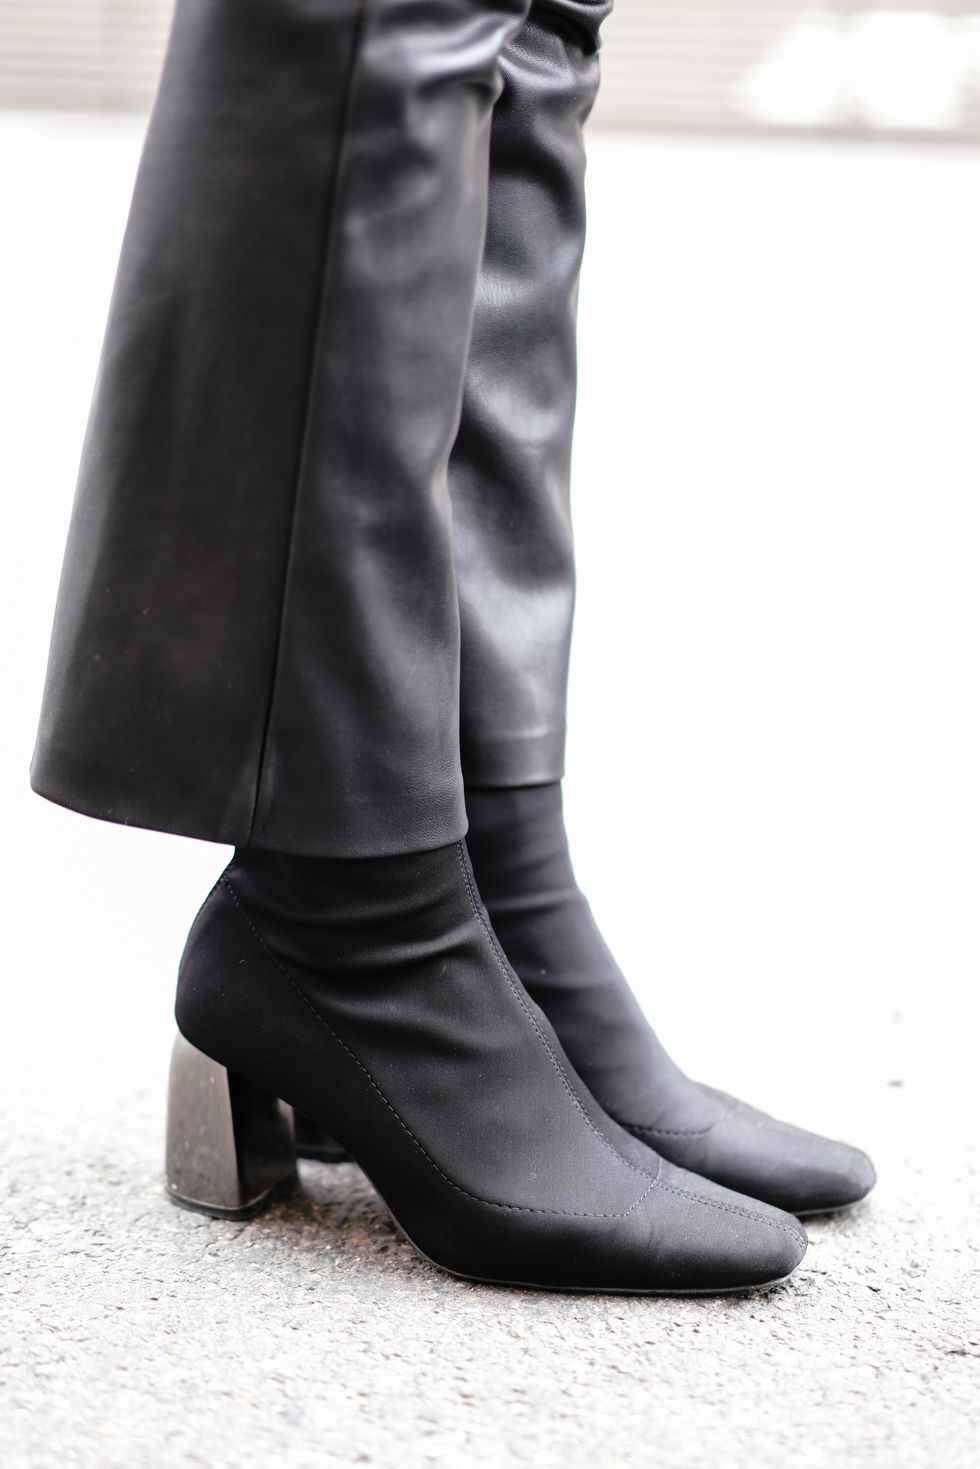 Footwear, Boot, Shoe, Knee-high boot, Leg, Riding boot, Joint, Leather, Ankle, Human leg, 